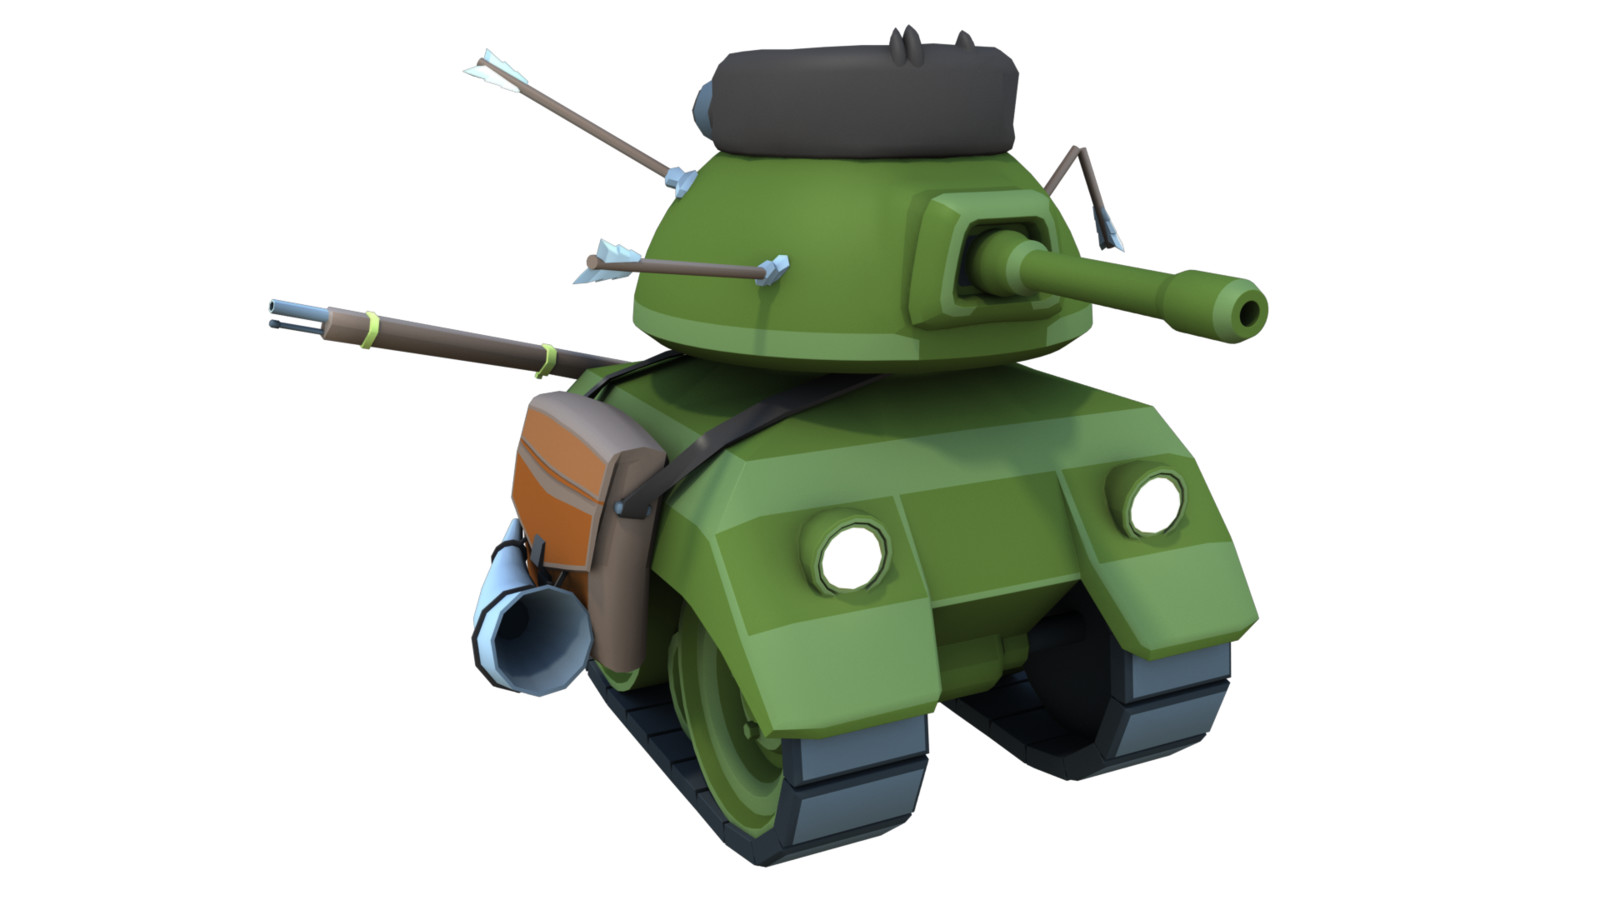 This was made as part of a decorative add-on Frontier Pack for a cartoony tank combat game.

I modeled and textured all of the decorative assets. I did not model the tank, though I did optimize the mesh and texture it.